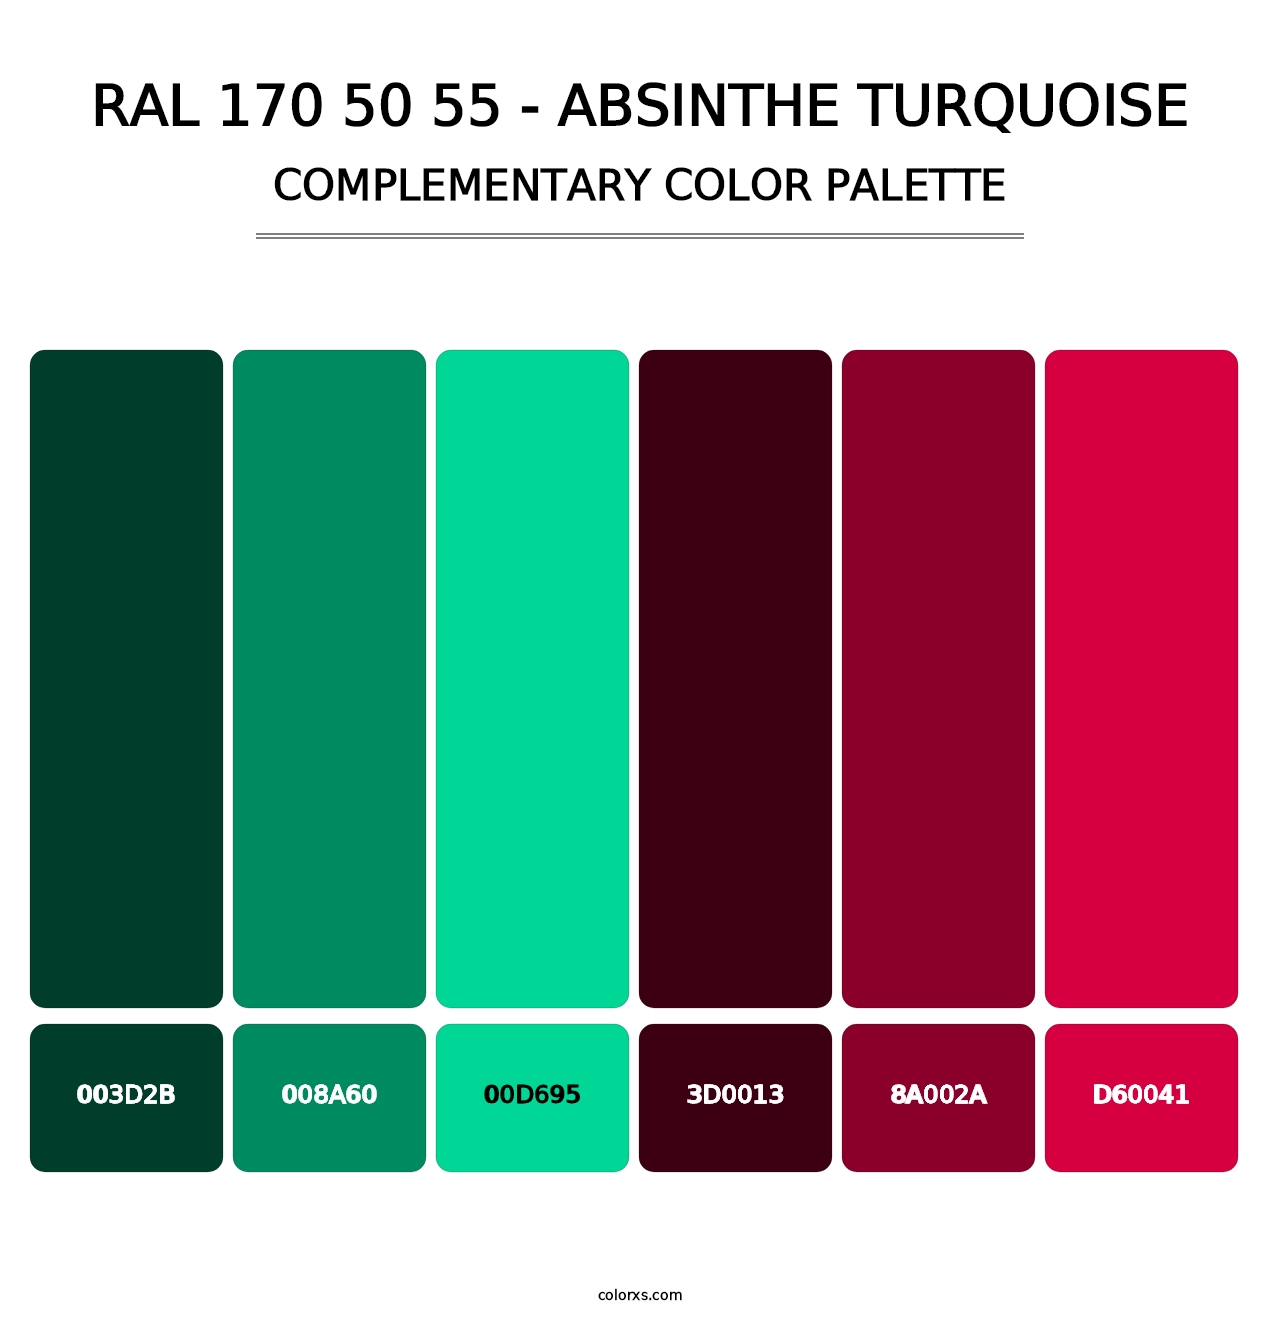 RAL 170 50 55 - Absinthe Turquoise - Complementary Color Palette